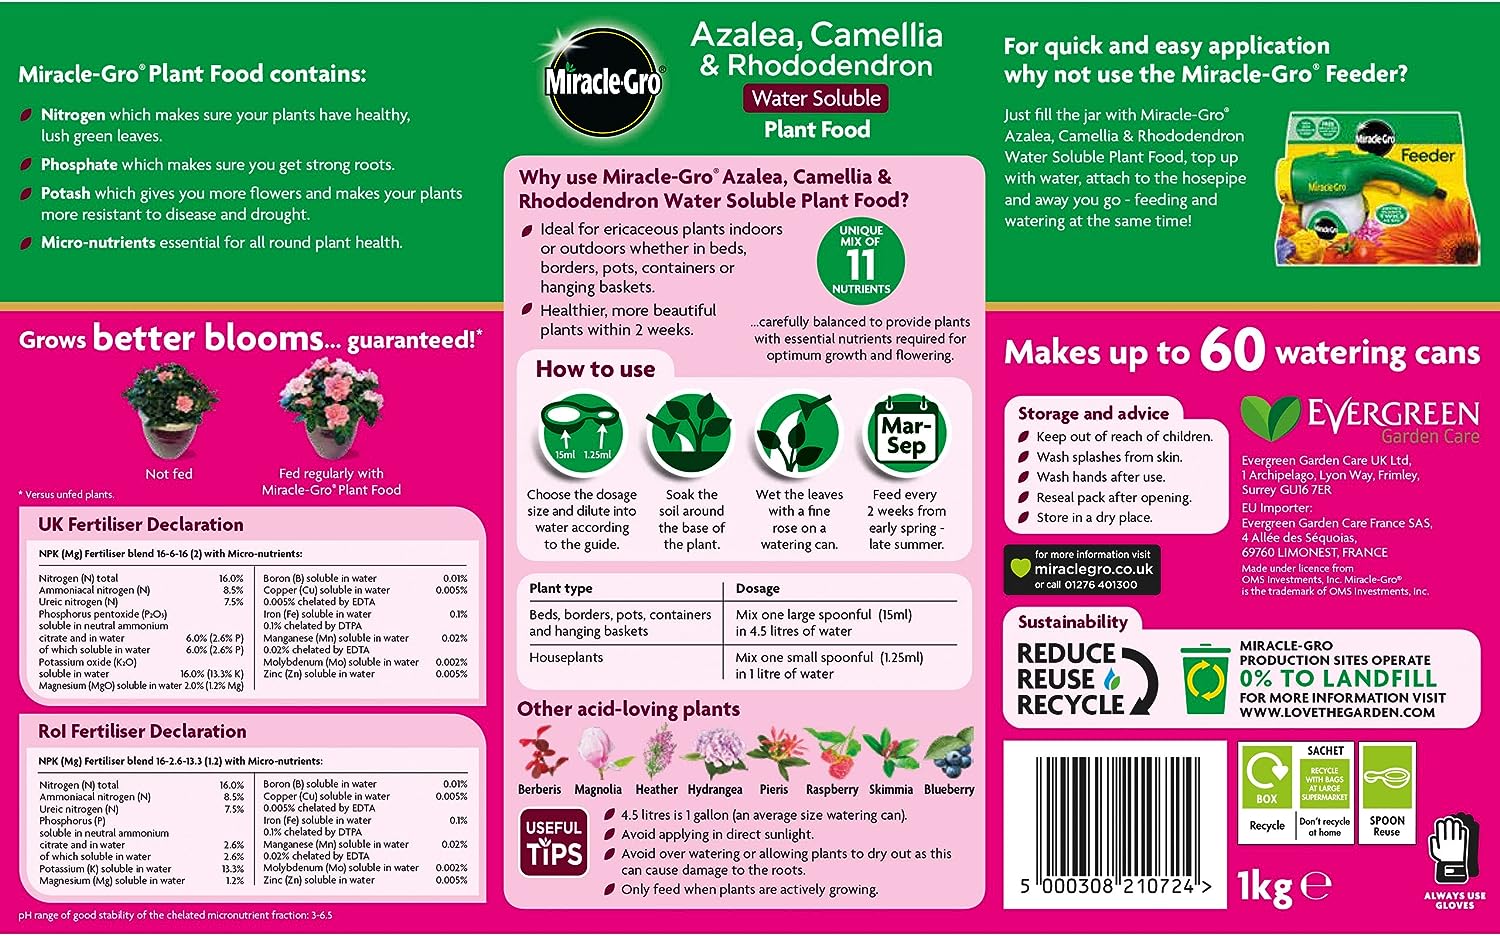 Miracle-Gro Azalea, Camellia & Rhododendron Water Soluble Plant Food 500g